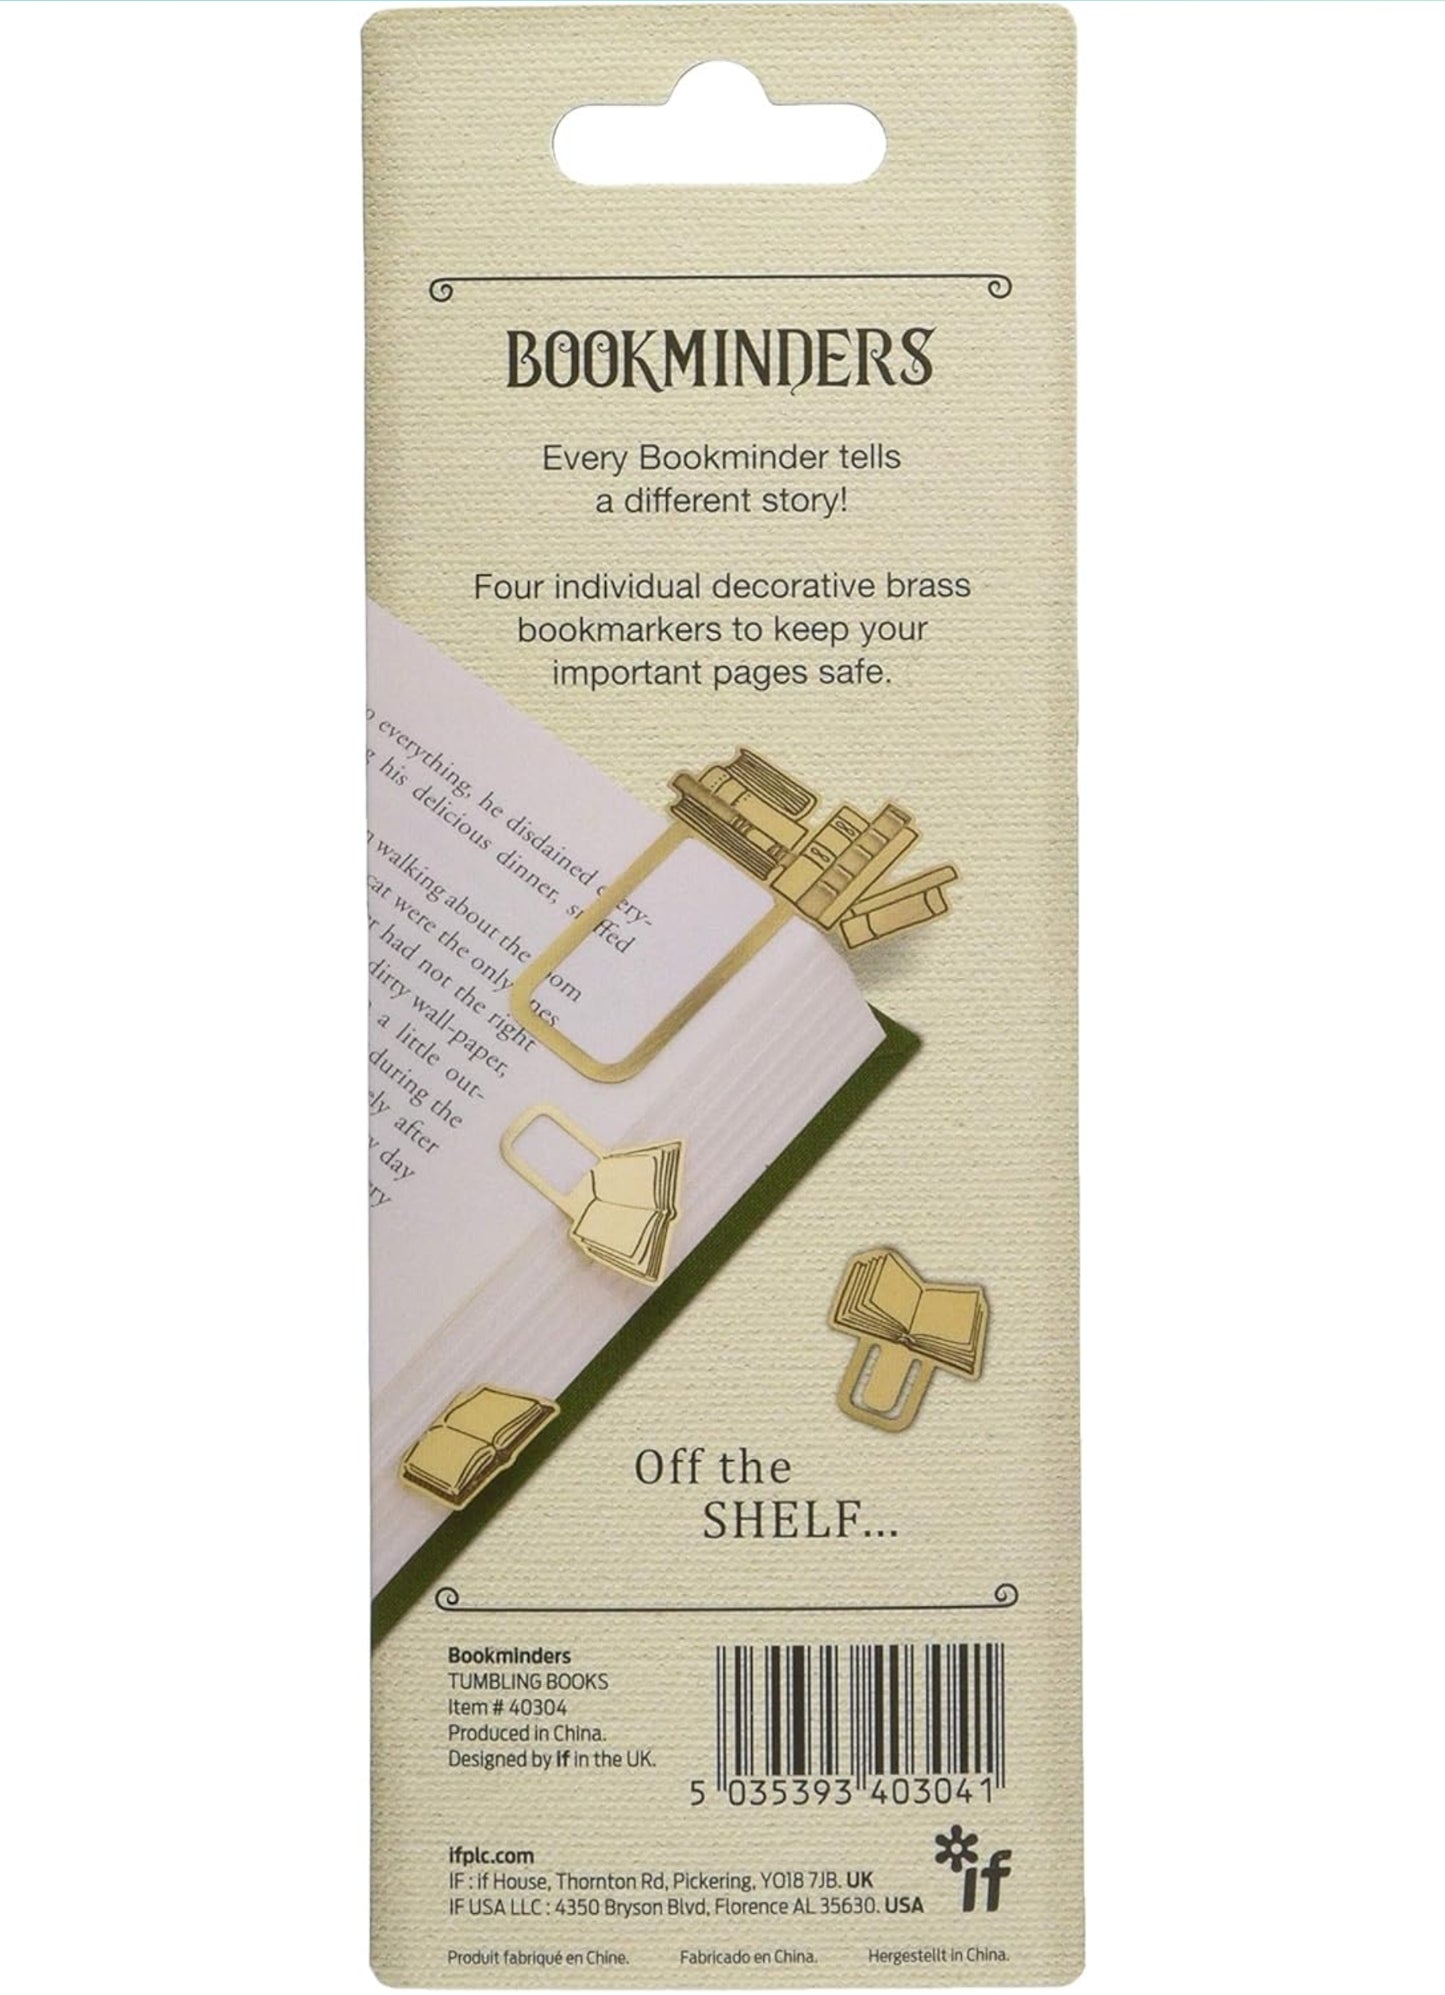 Bookminders Page Markers - Tumbling Books